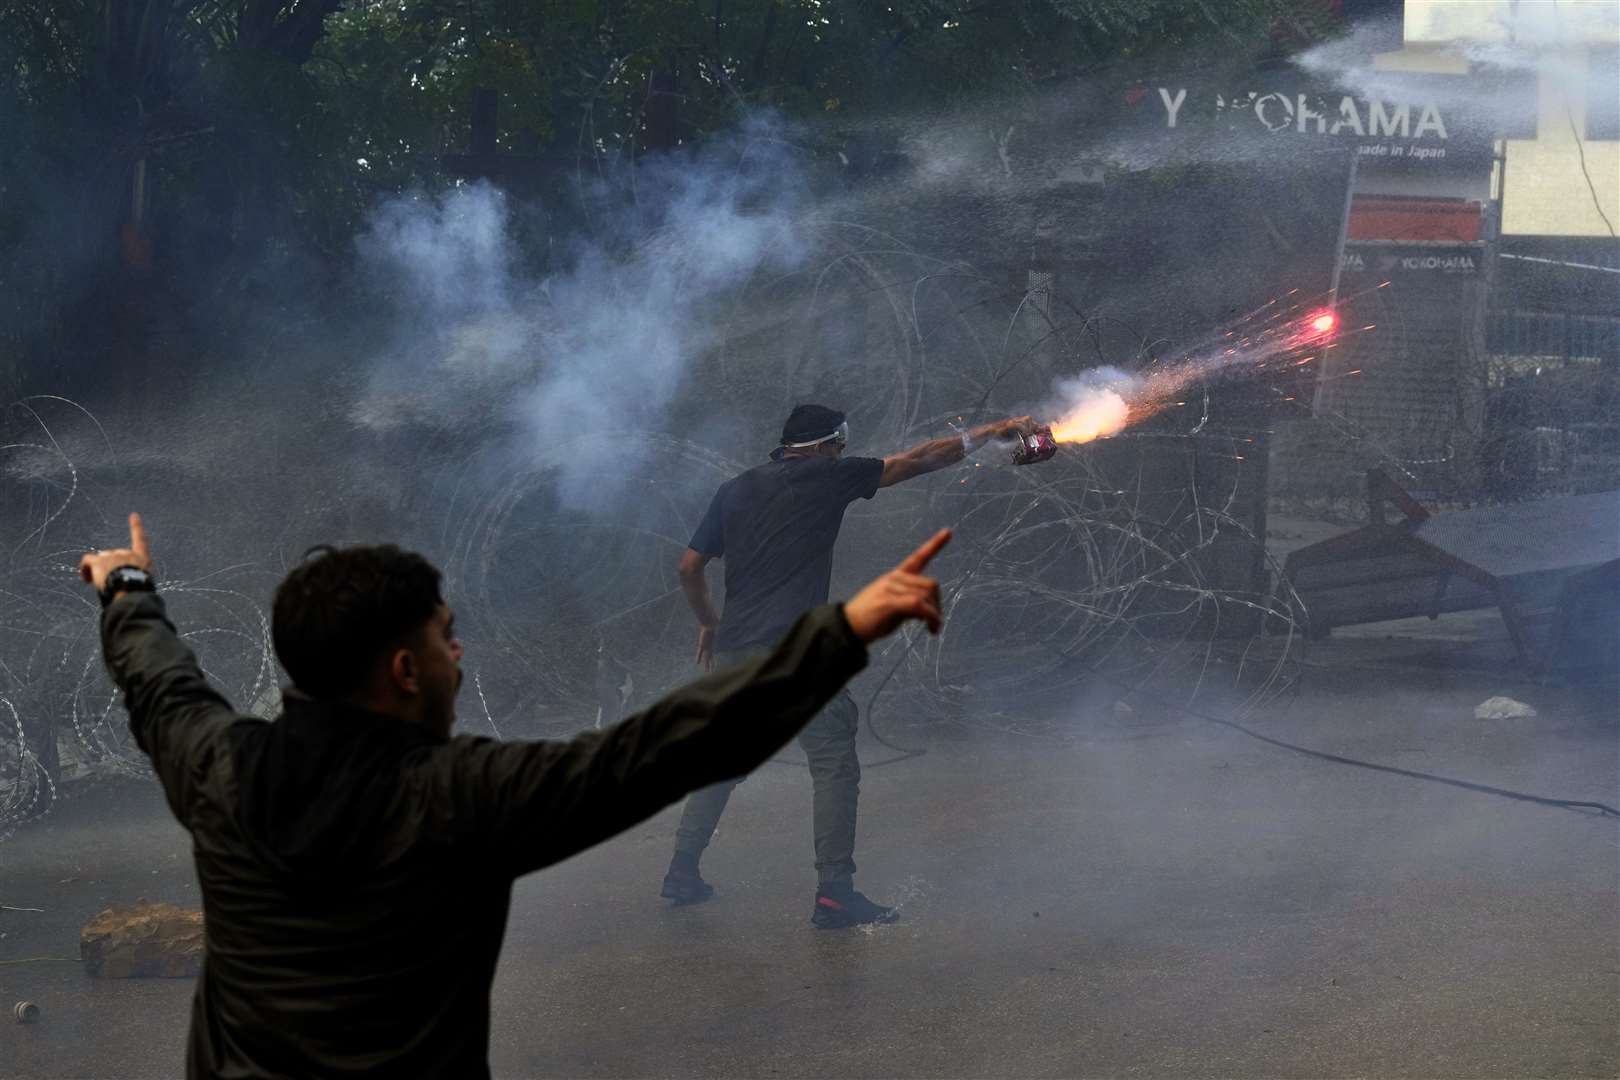 A protester launches fireworks at riot police during a demonstration in solidarity with the Palestinian people in Gaza (Bilal Hussein/AP)